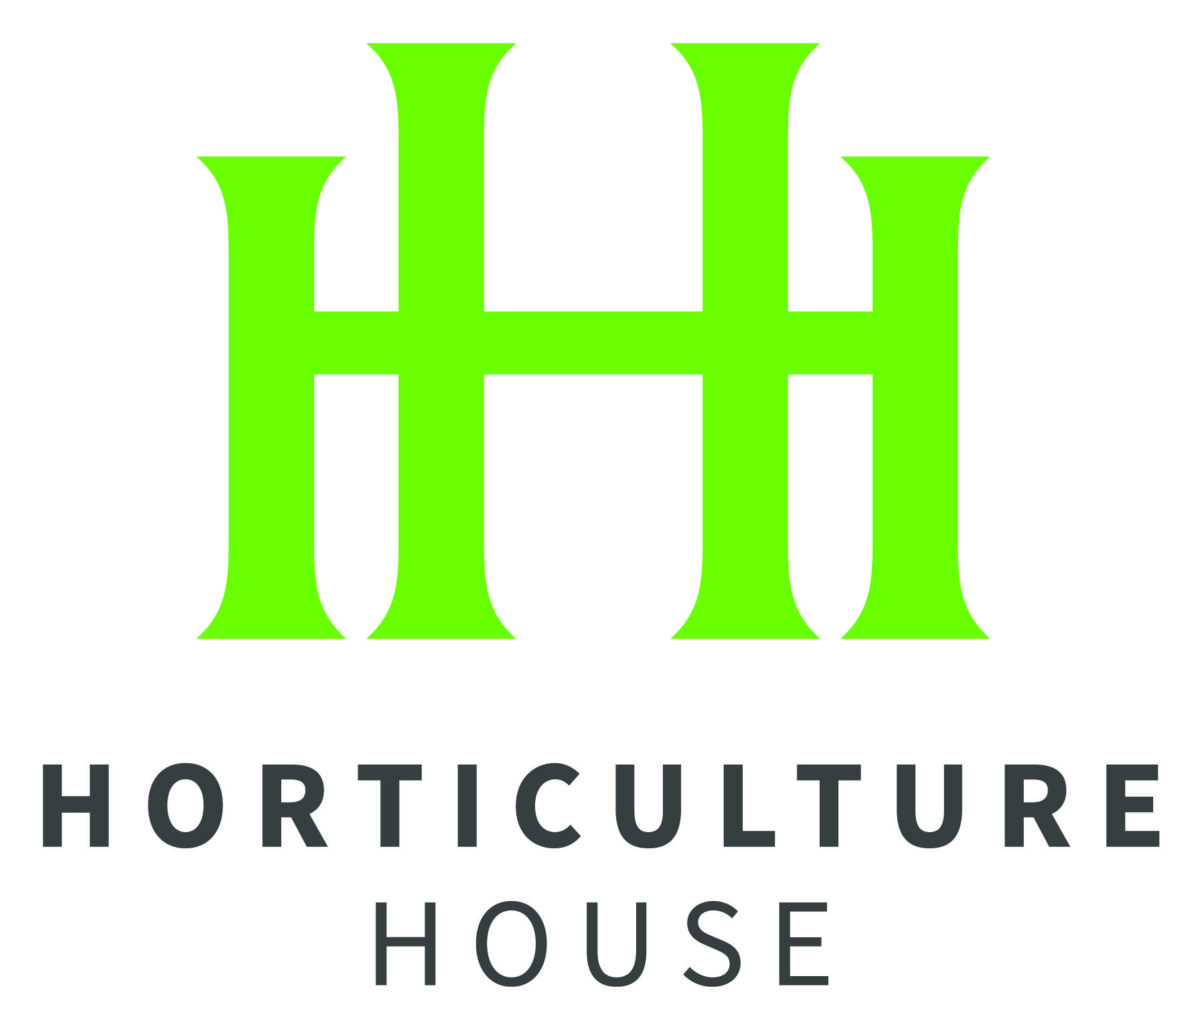 Horticulture House logo